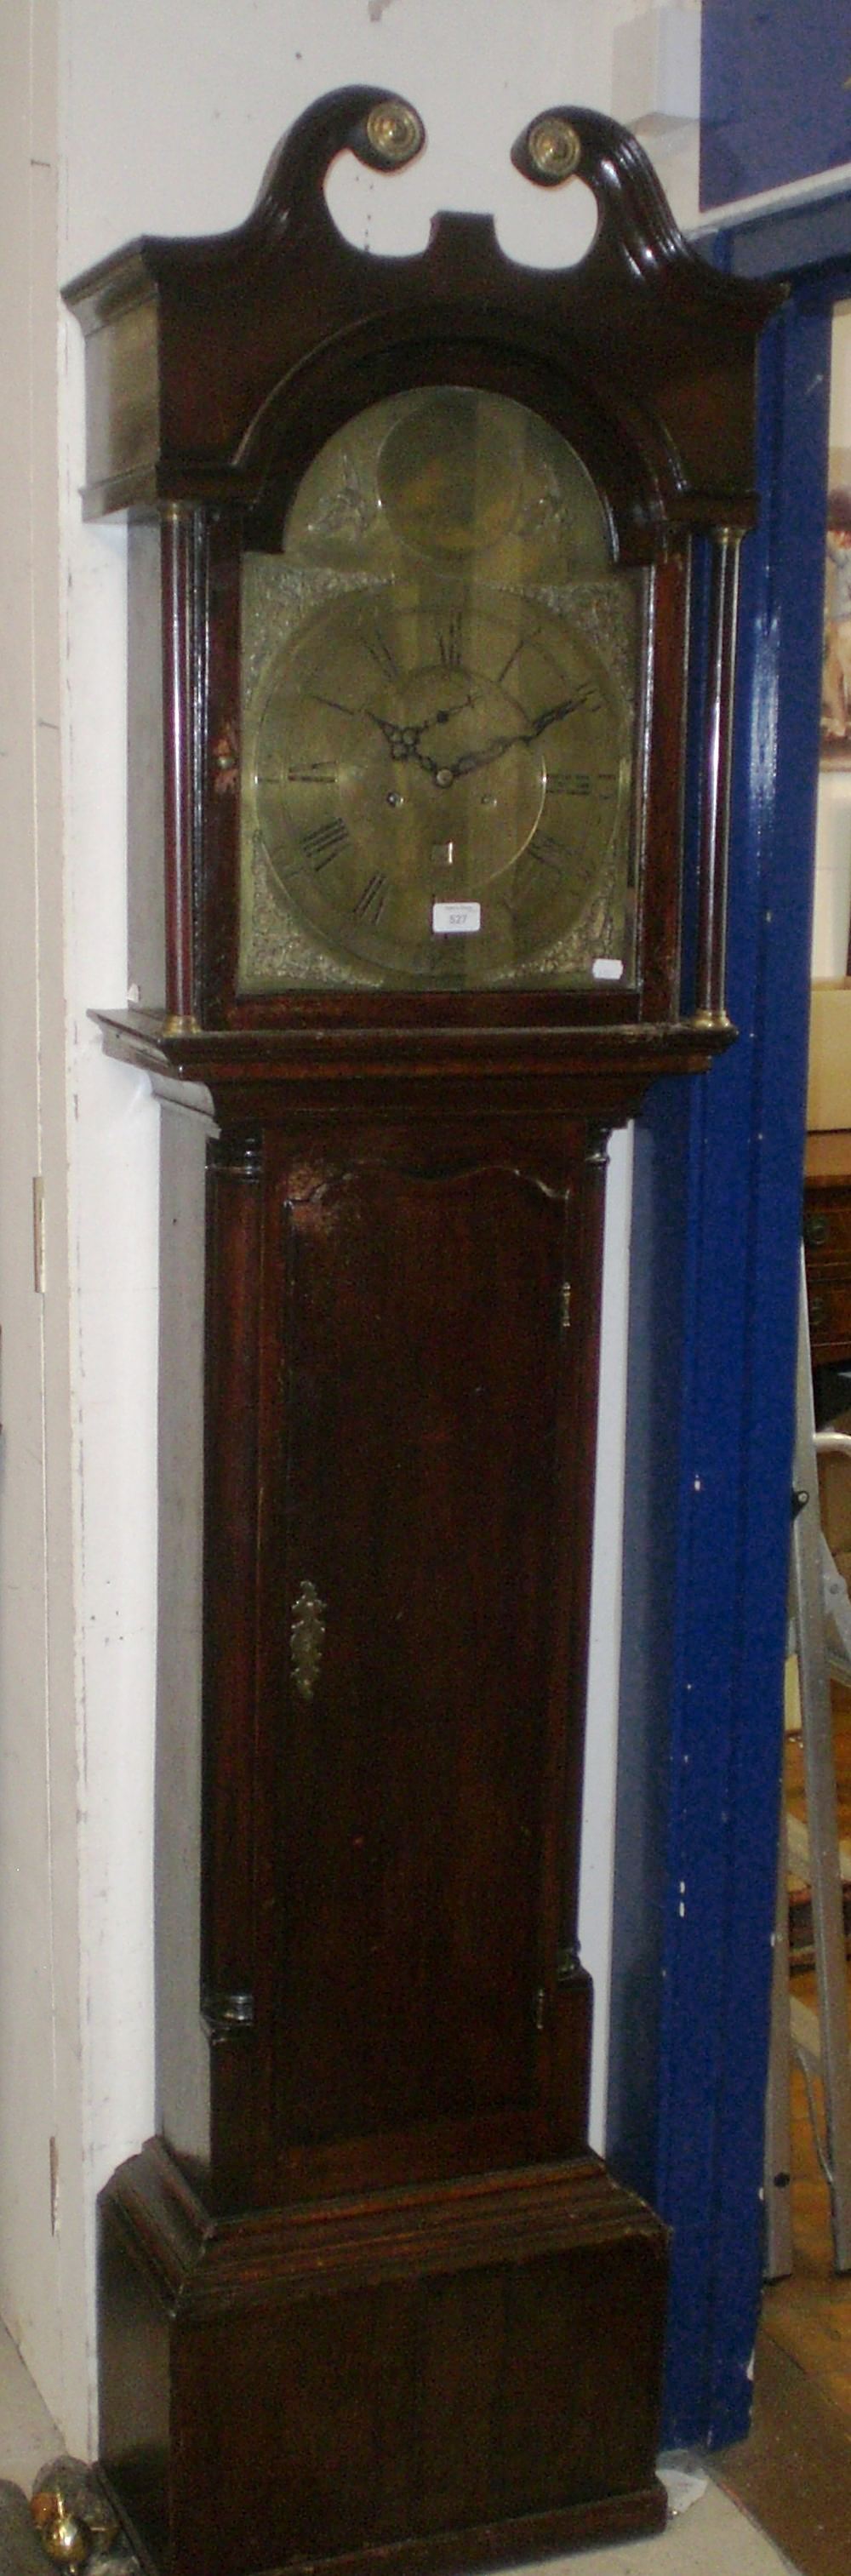 A George III oak longcase clock, the brass dial inscribed "John Hayes Wrexham" the chapter ring